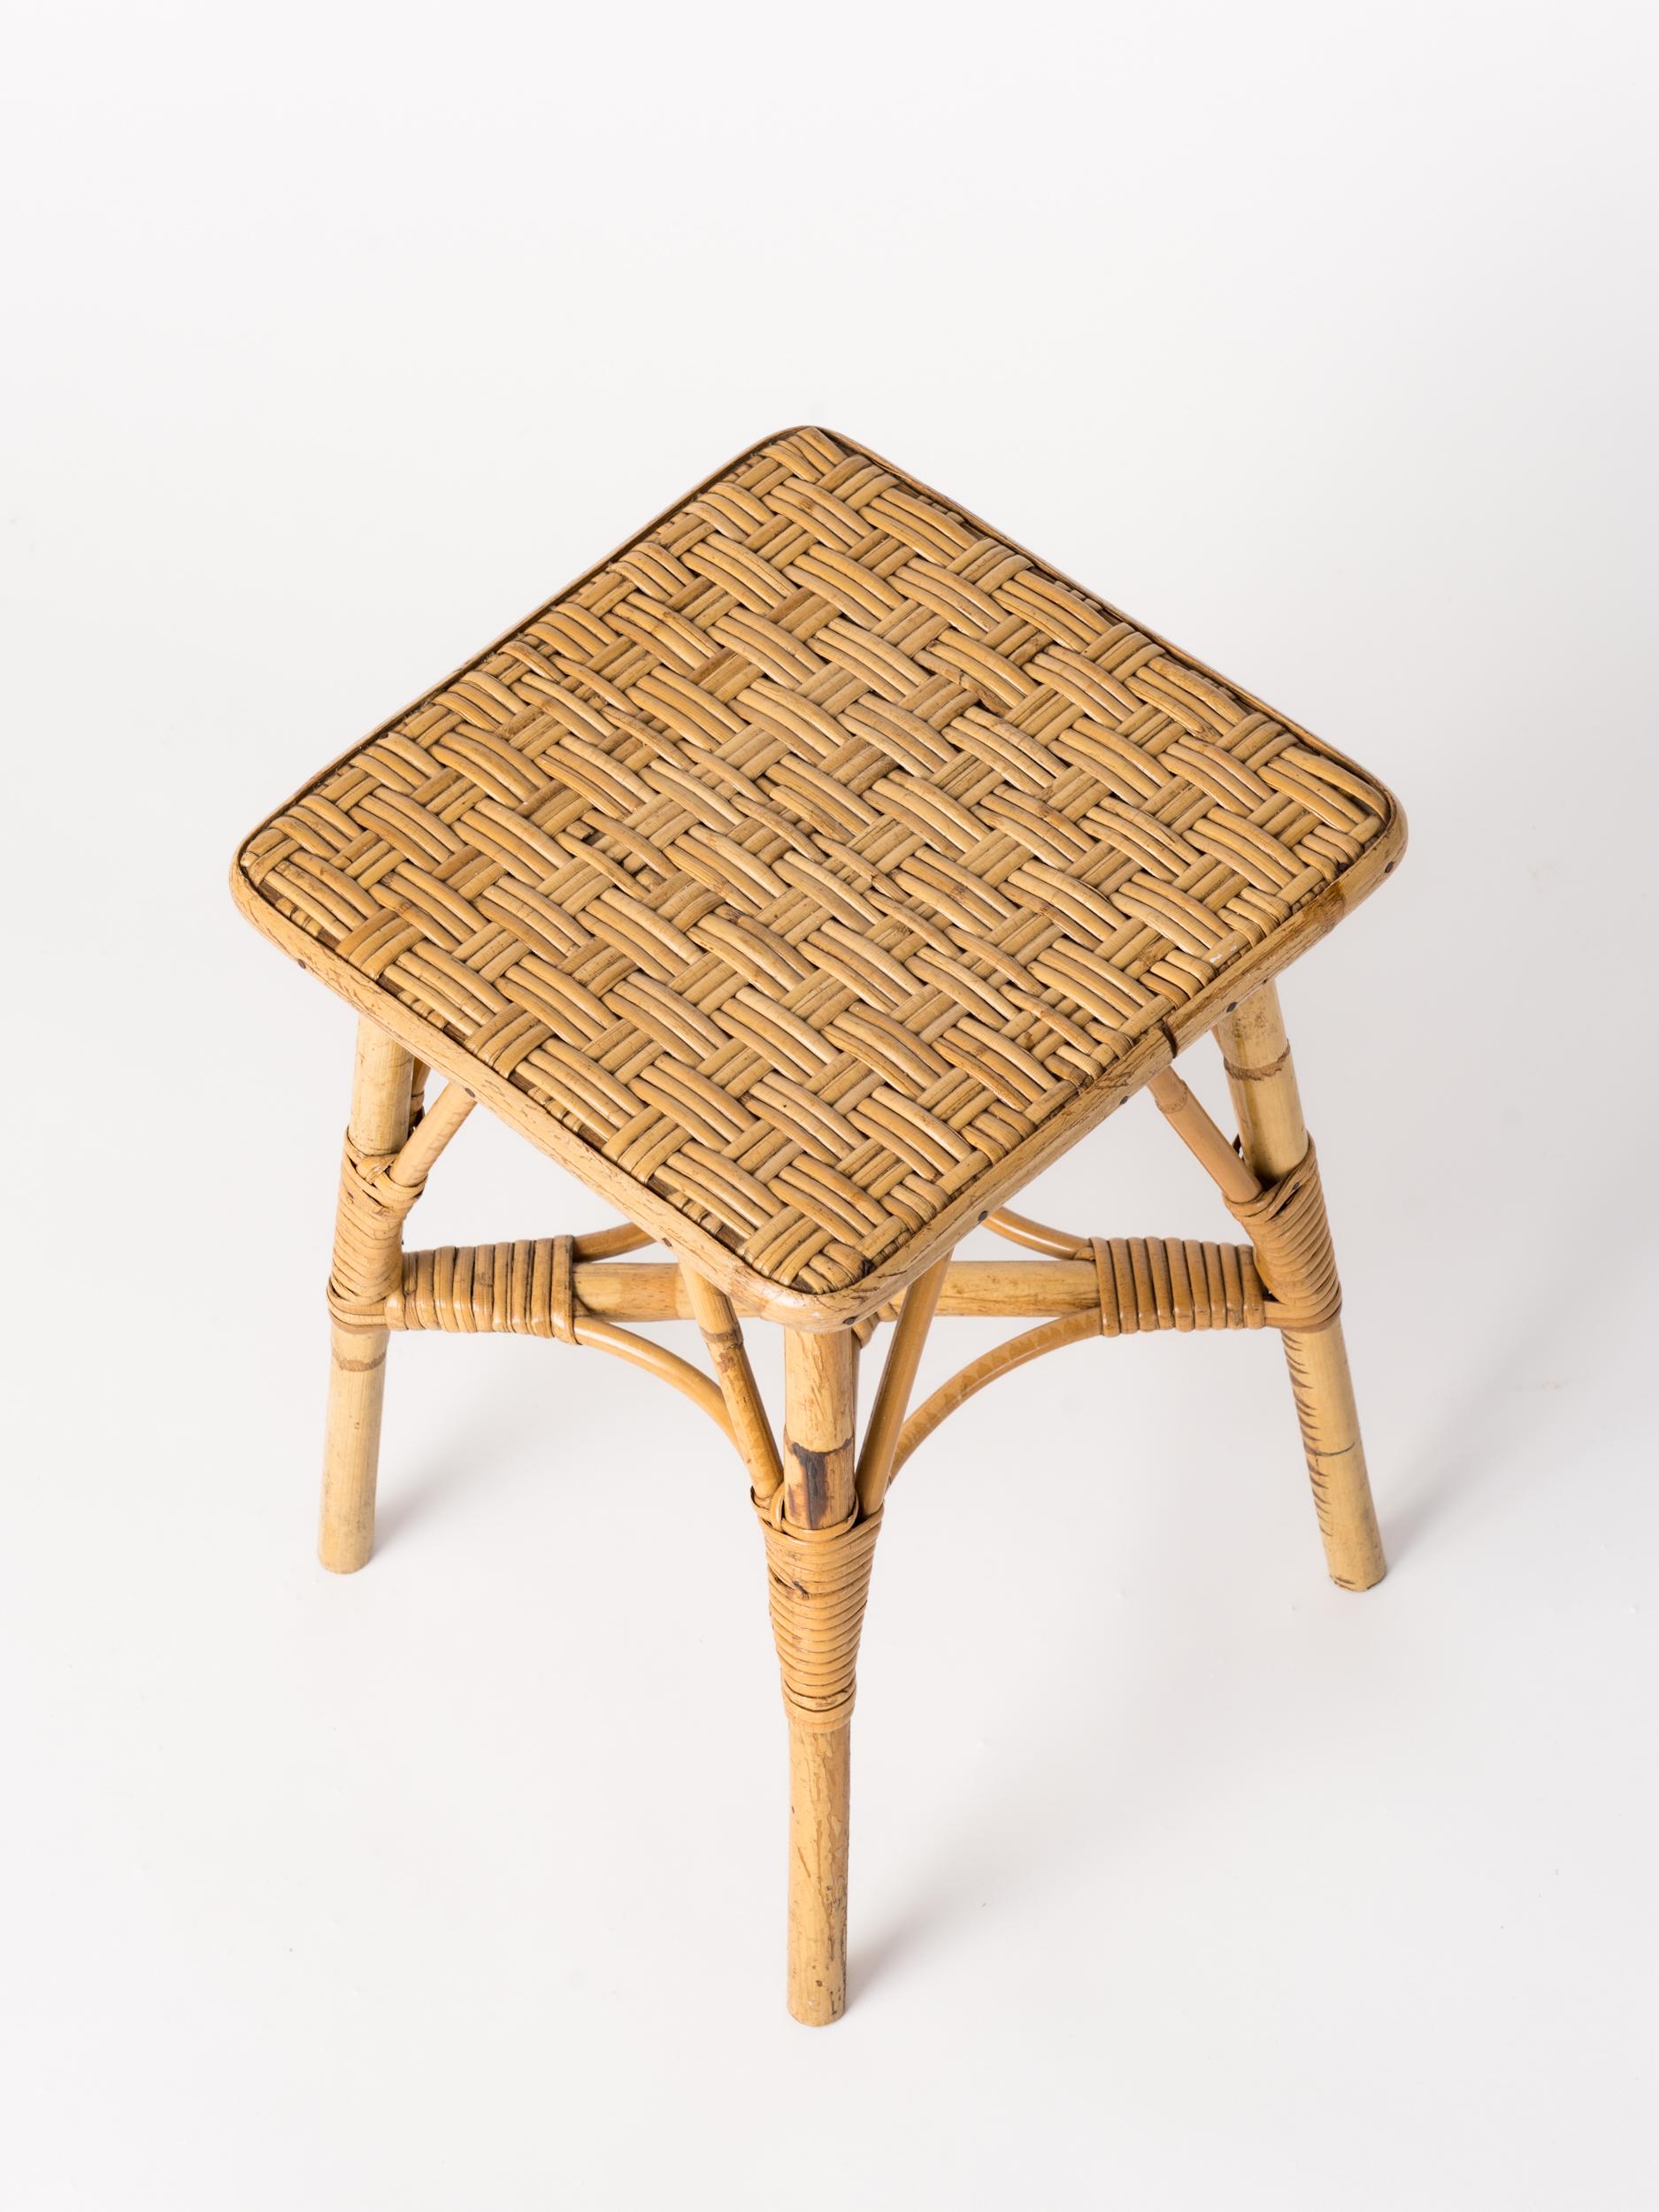 French Petite Rattan Stool in the Style of Louis Sognot, France, 1960's For Sale